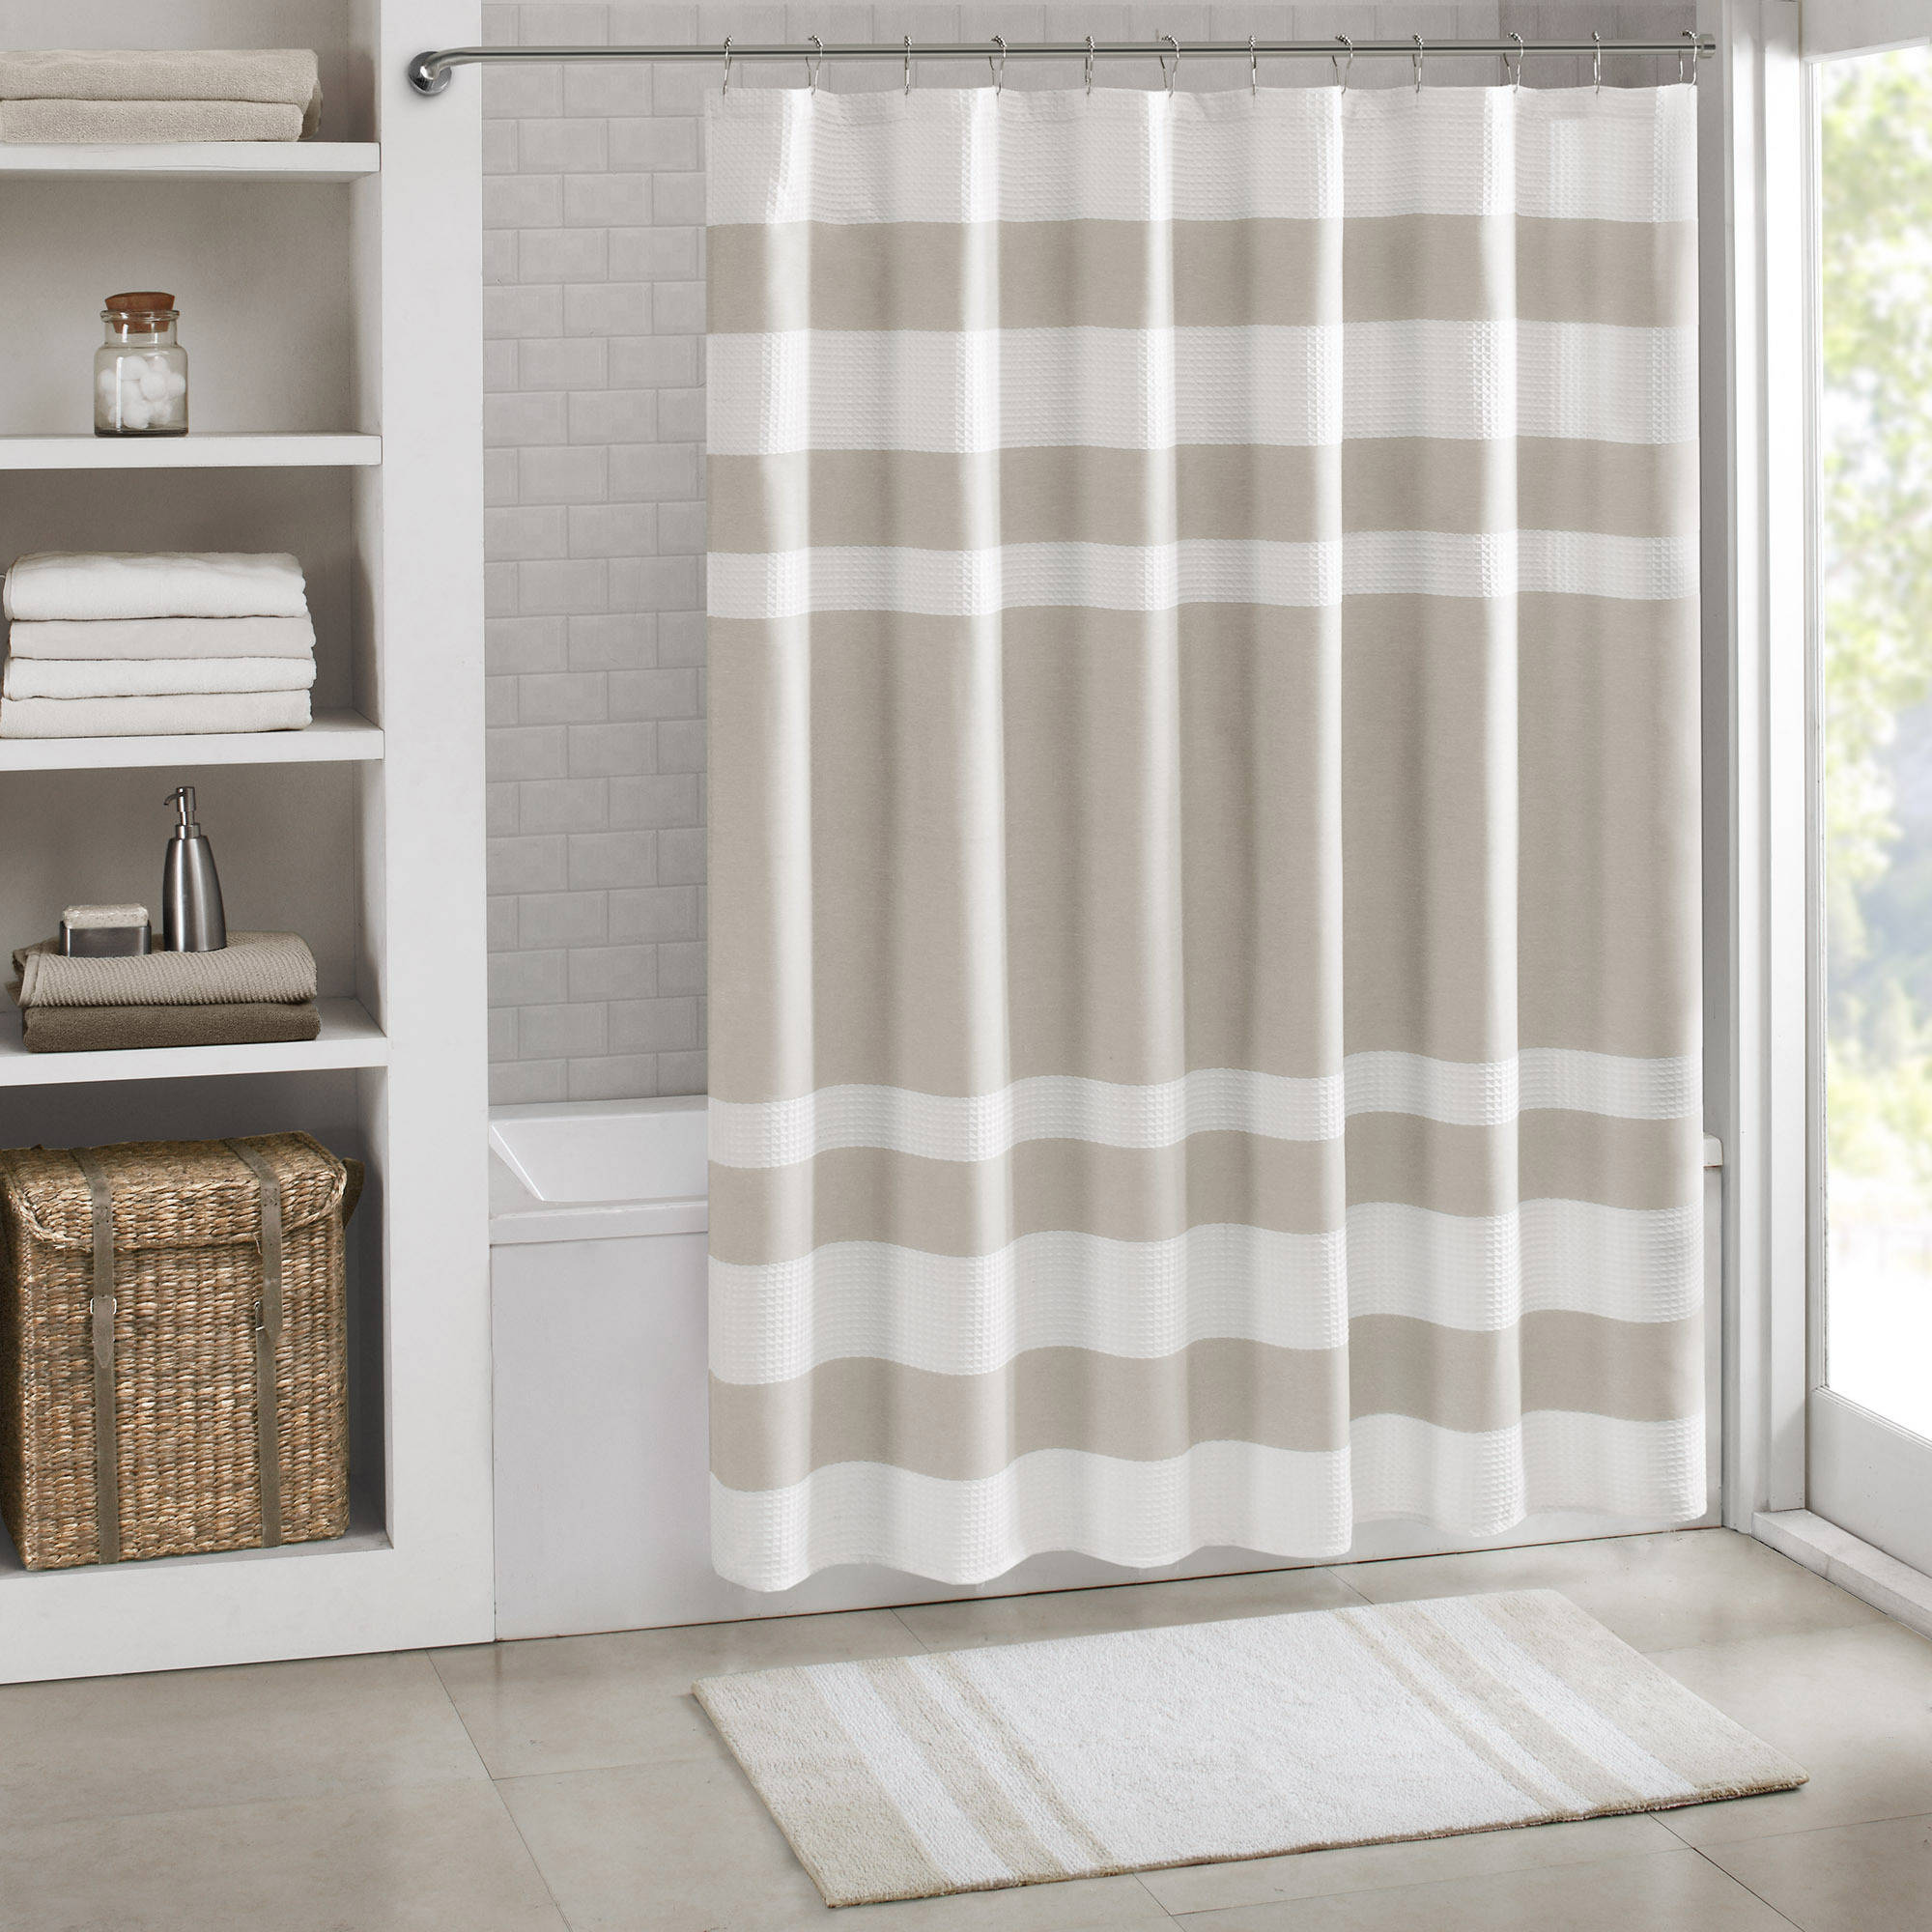 Home Essence Spa Waffle Shower Curtain with 3M Treatment, Taupe - image 1 of 4